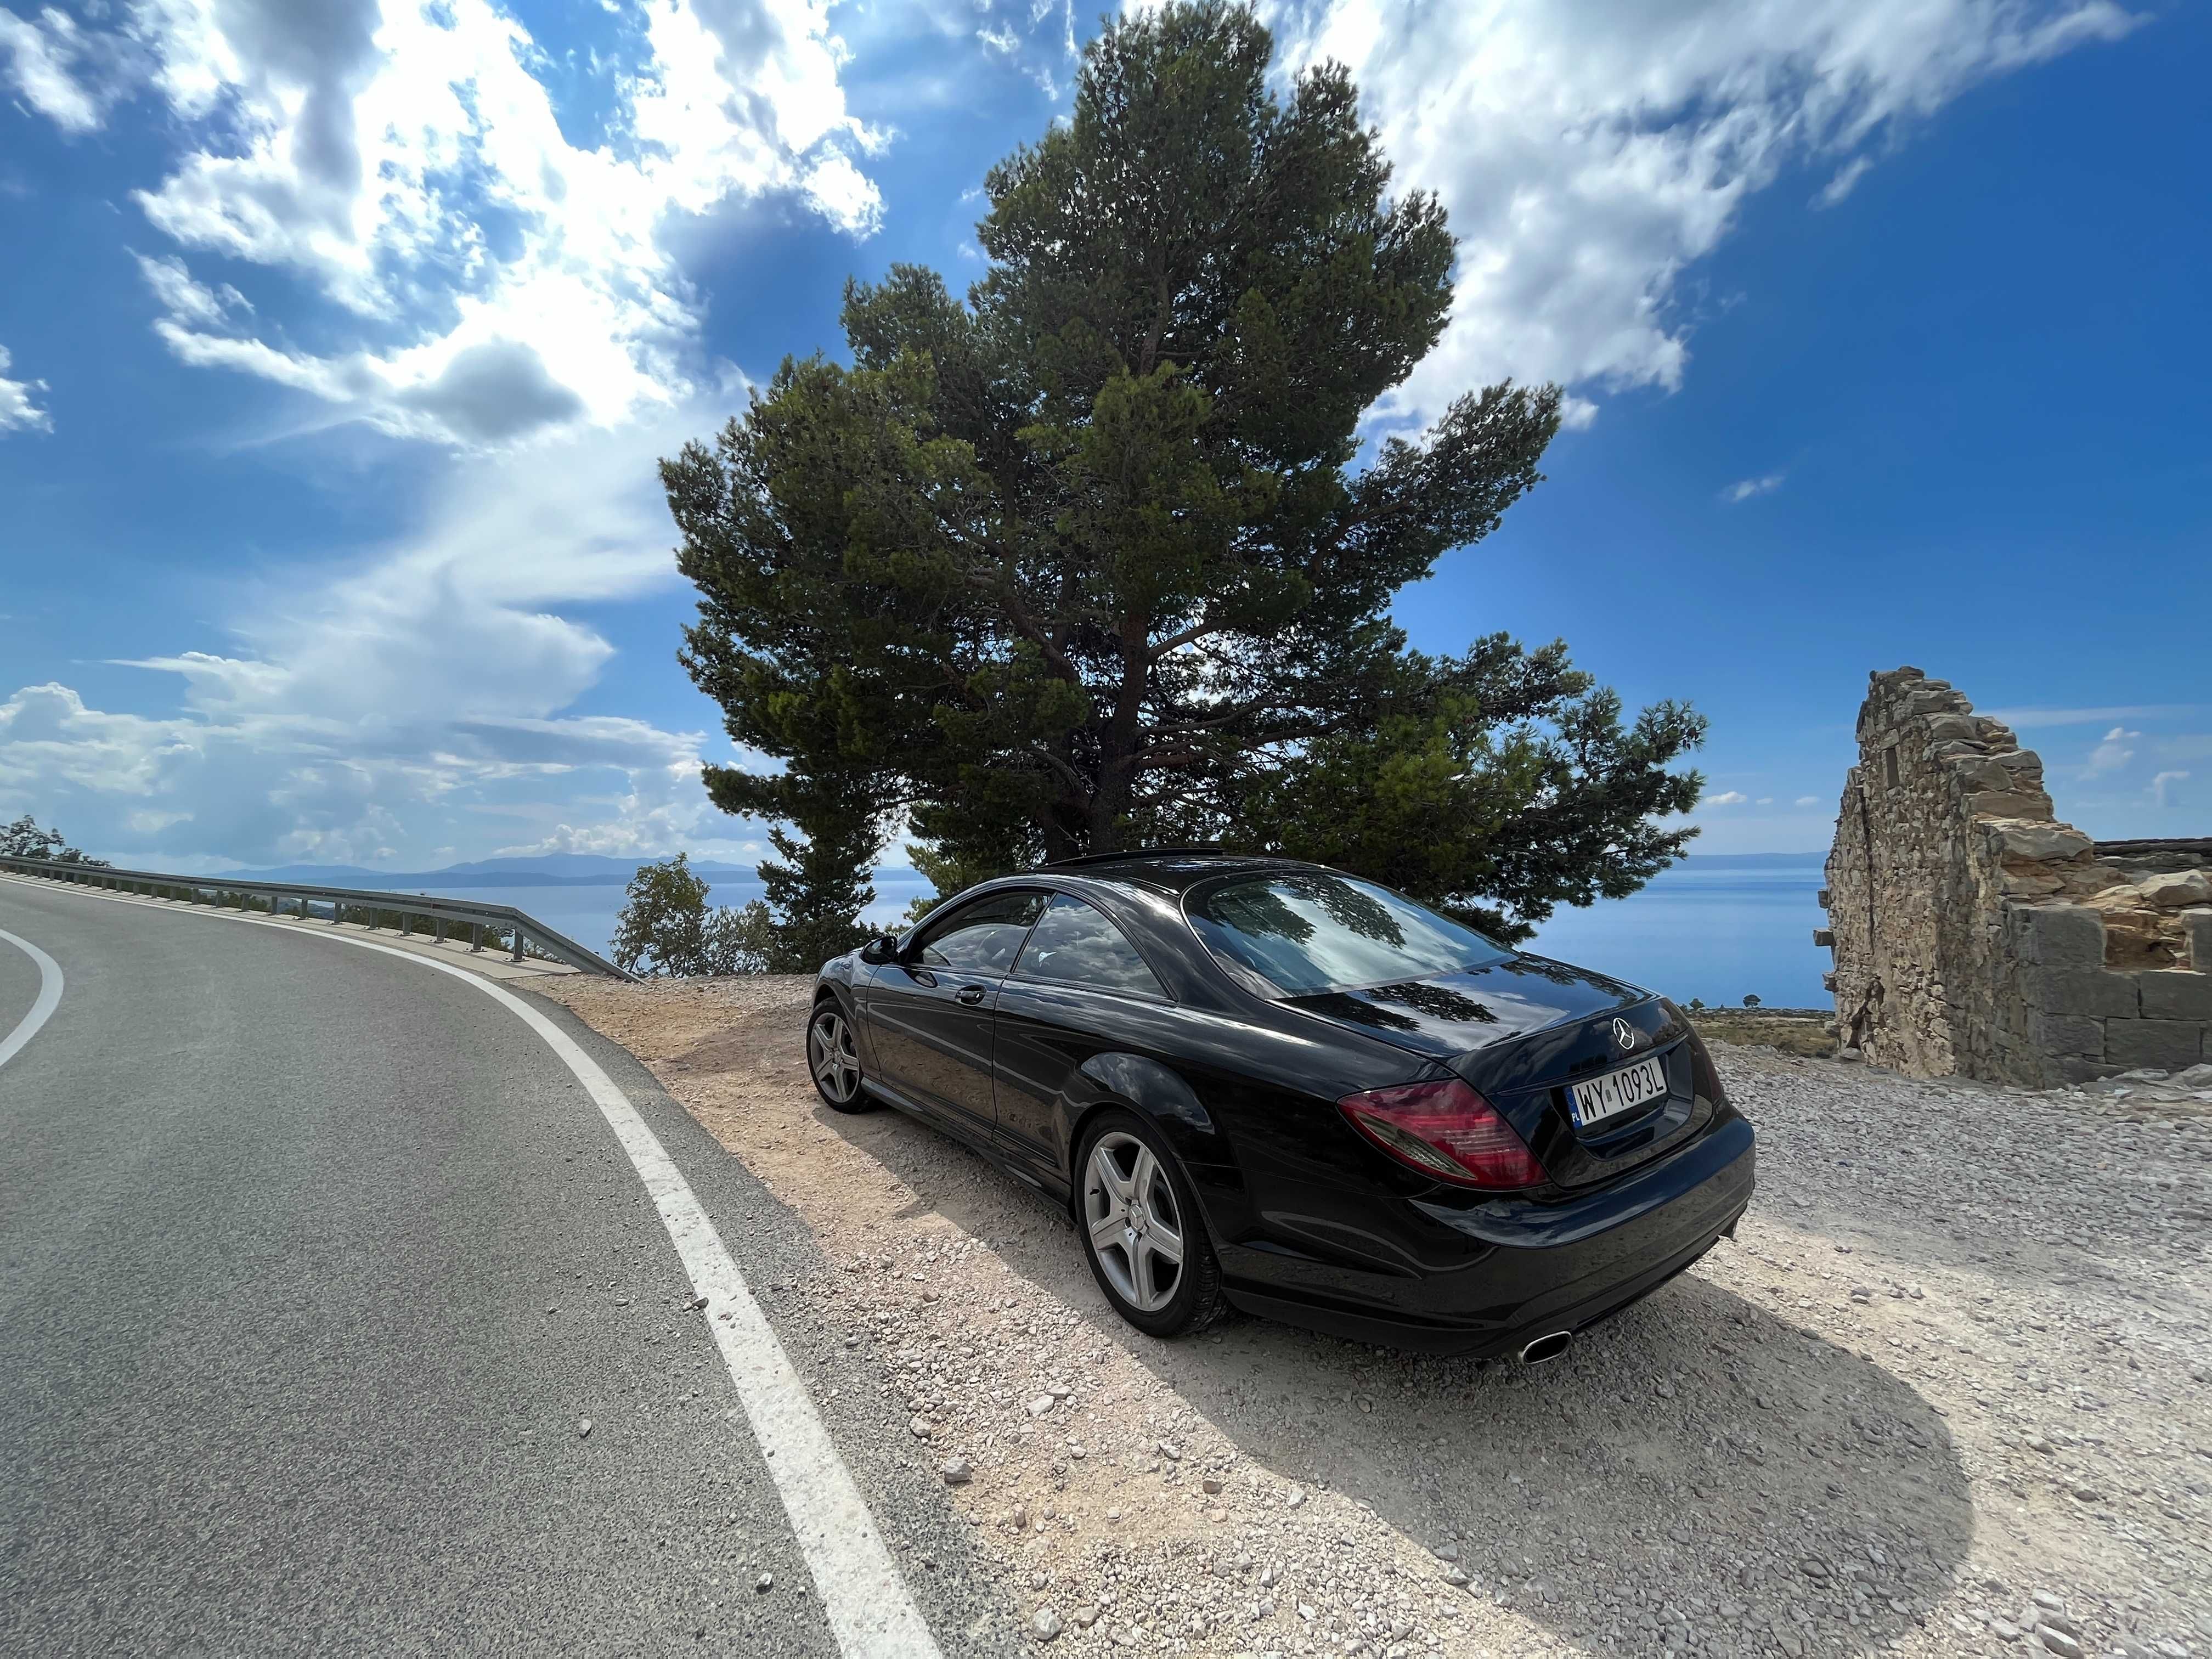 Mercedes-Benz CL 500 550 AMG 5.5 V8 , C216 W221 S coupe